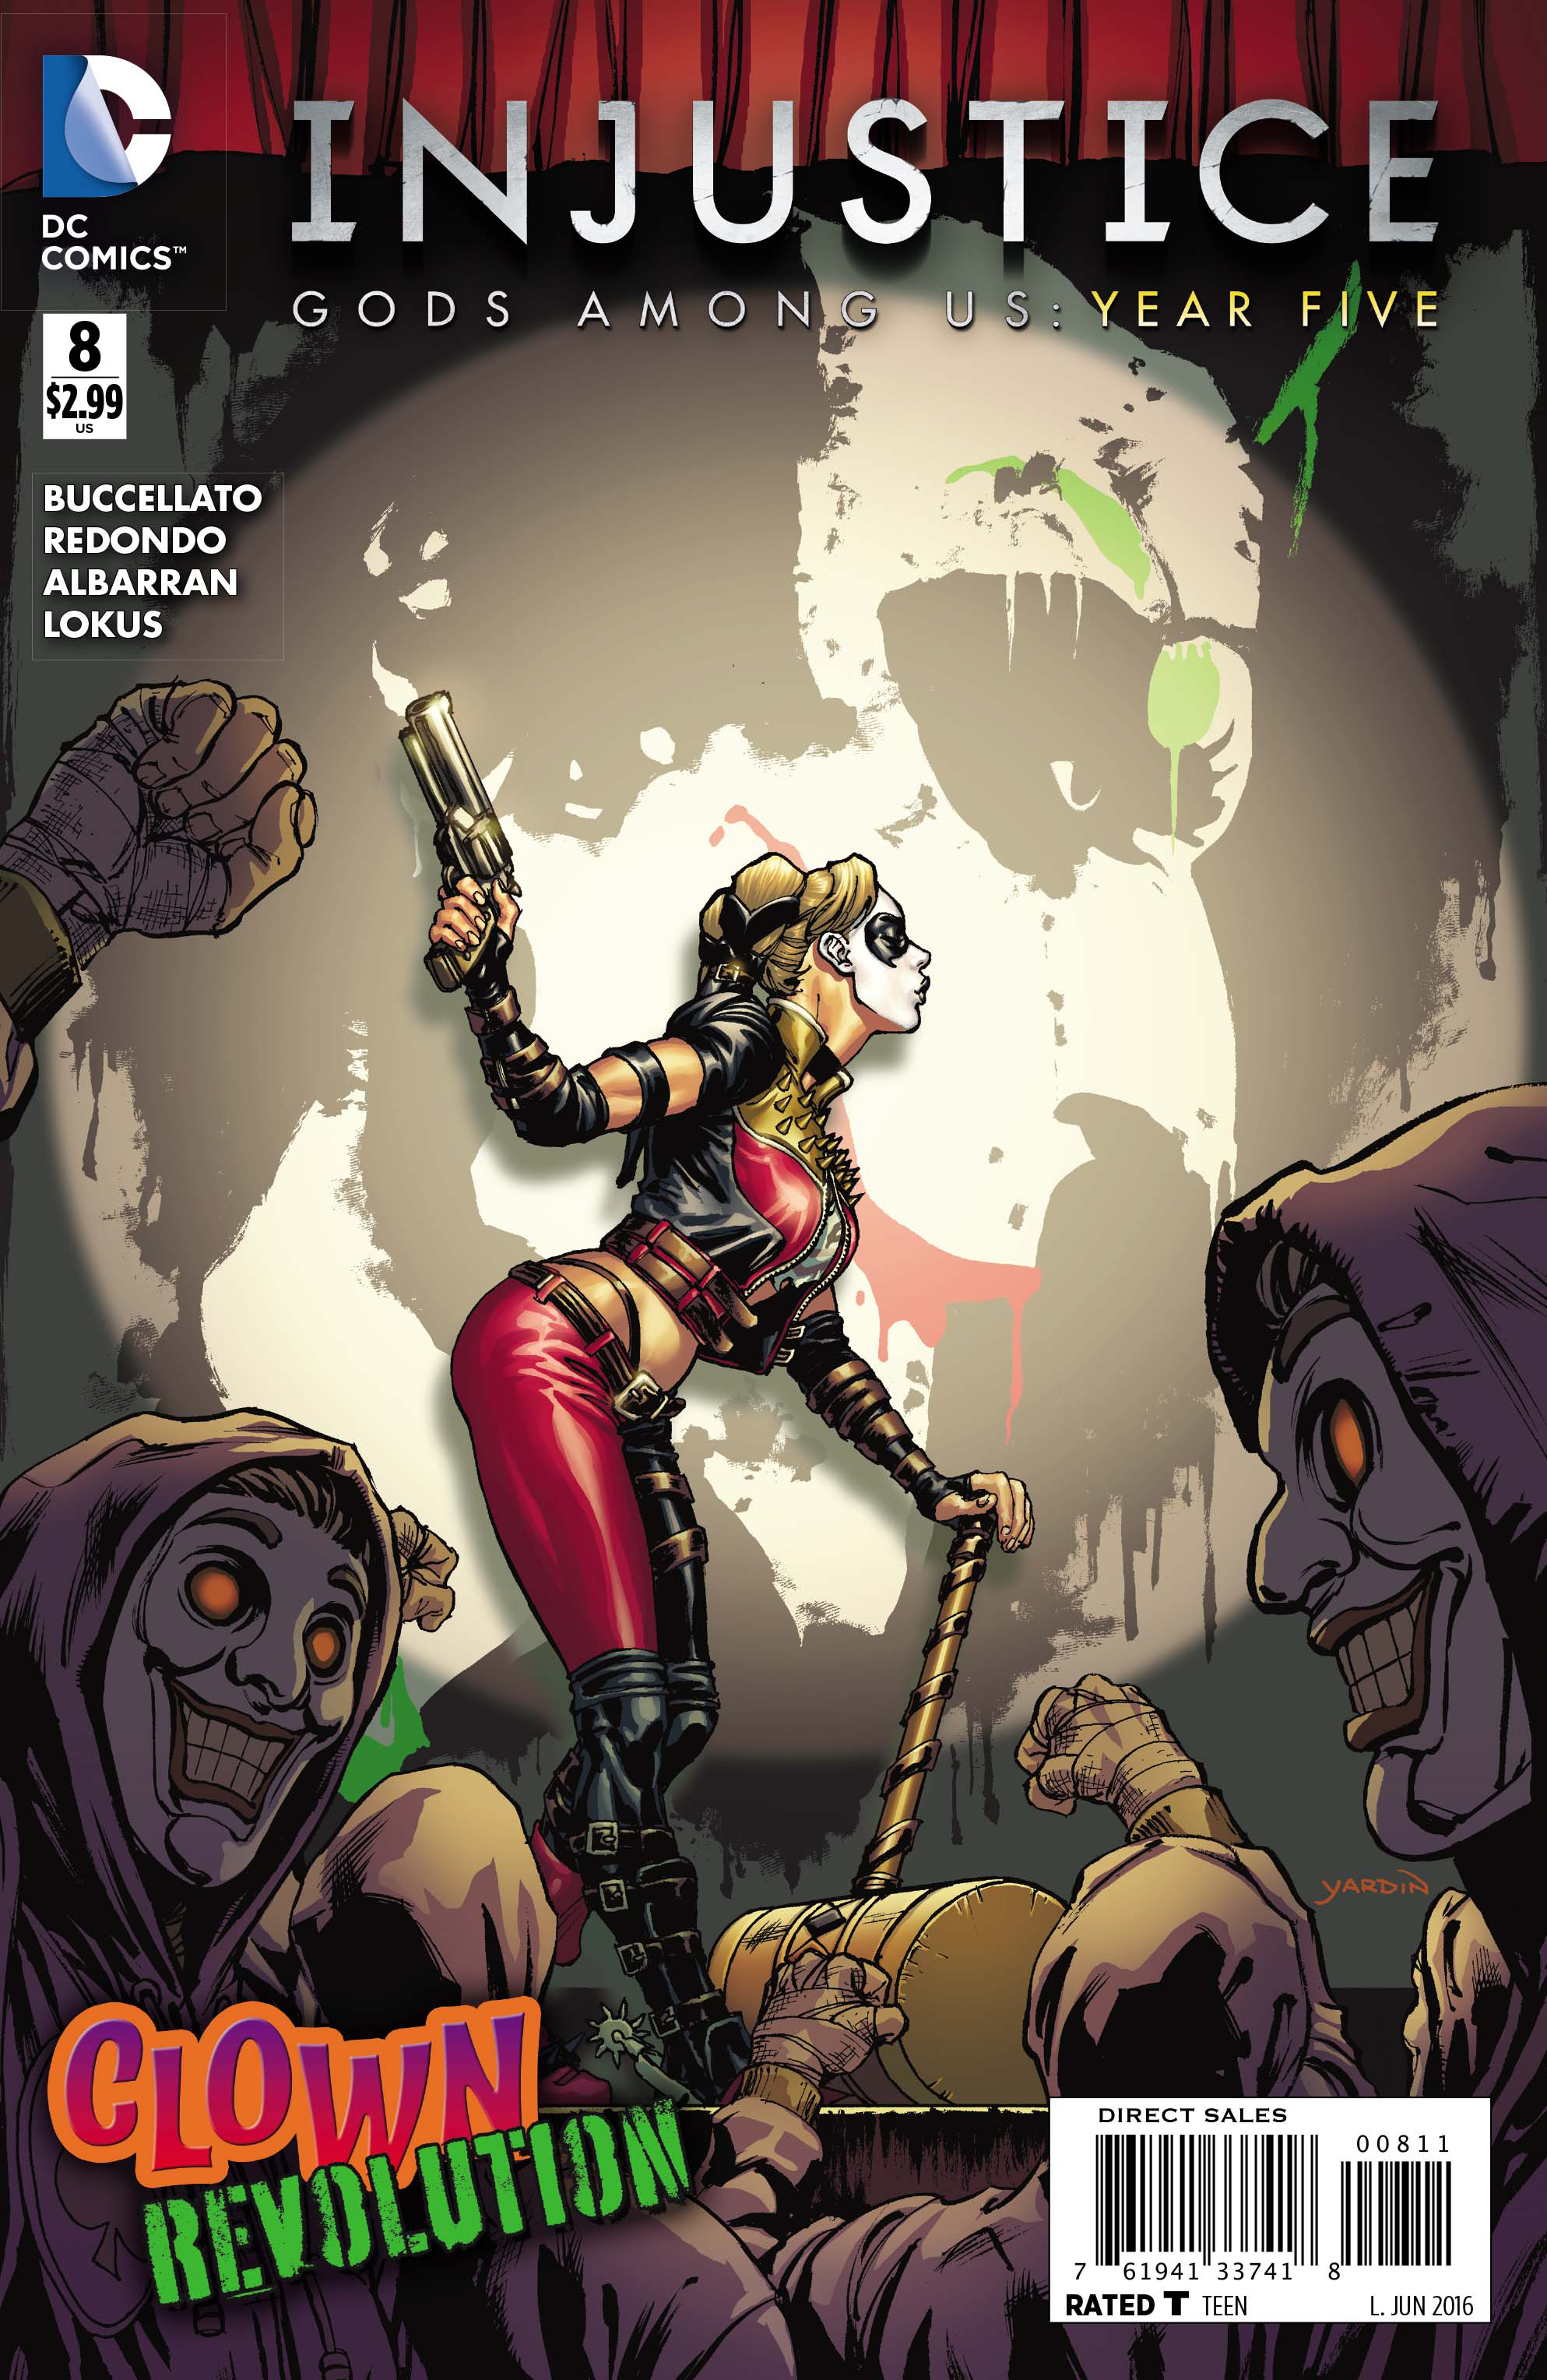 INJUSTICE GODS AMONG US YEAR FIVE #8